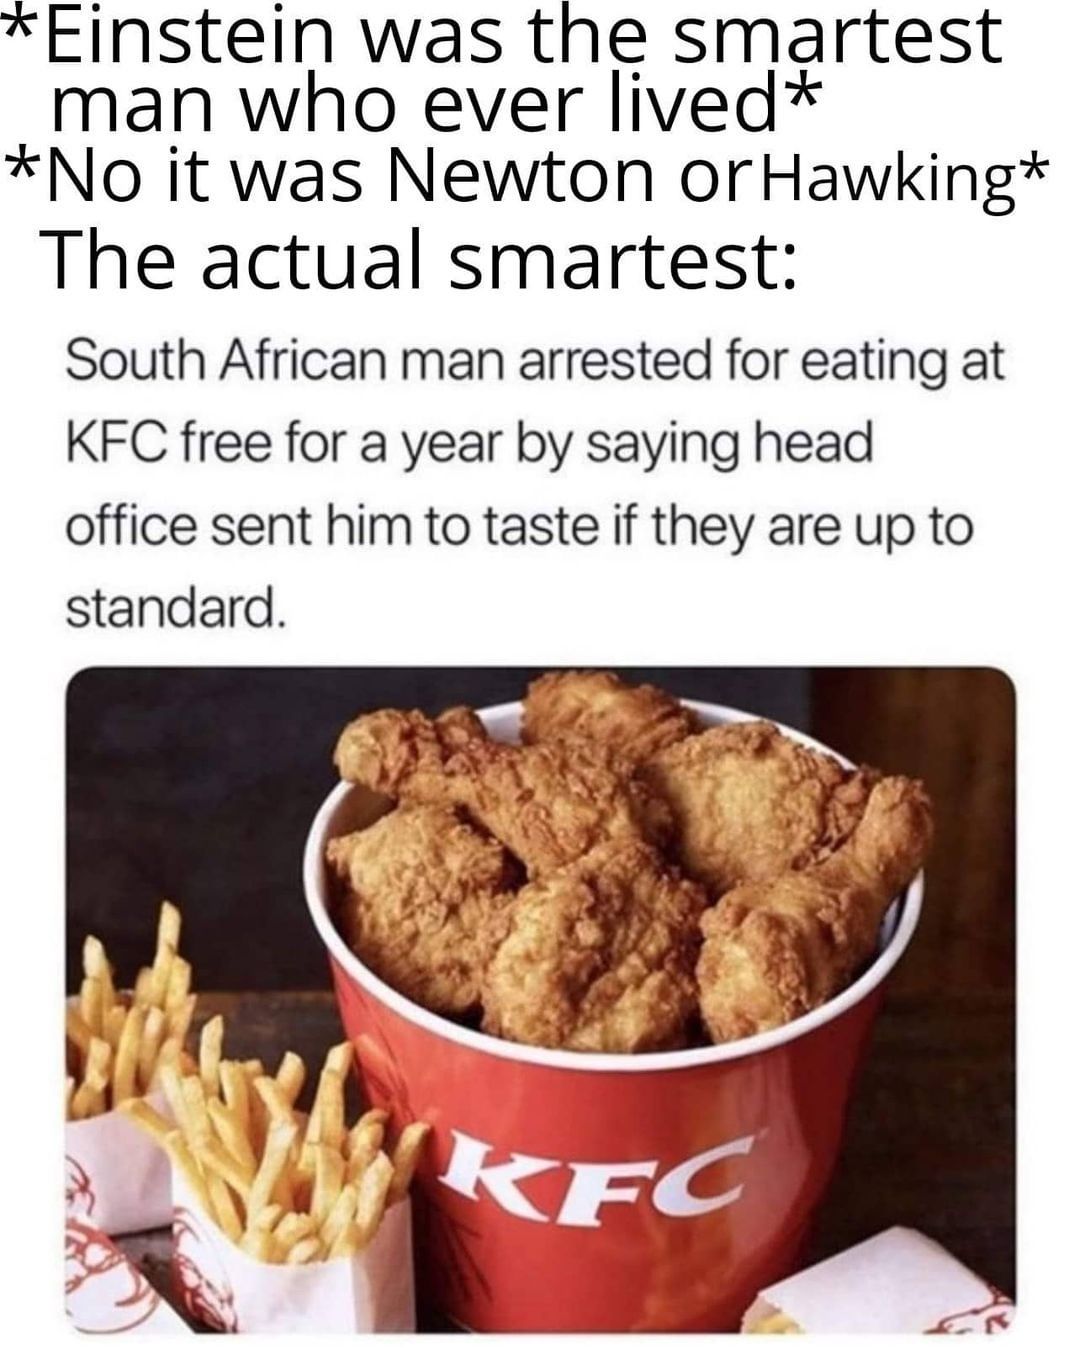 *Einstein was the smartest man who ever lived*  *No it was Newton or Hawking*  The actual smartest: South African man arrested for eating at KFC free for a year by saying head office sent him to taste if they are up to standard.